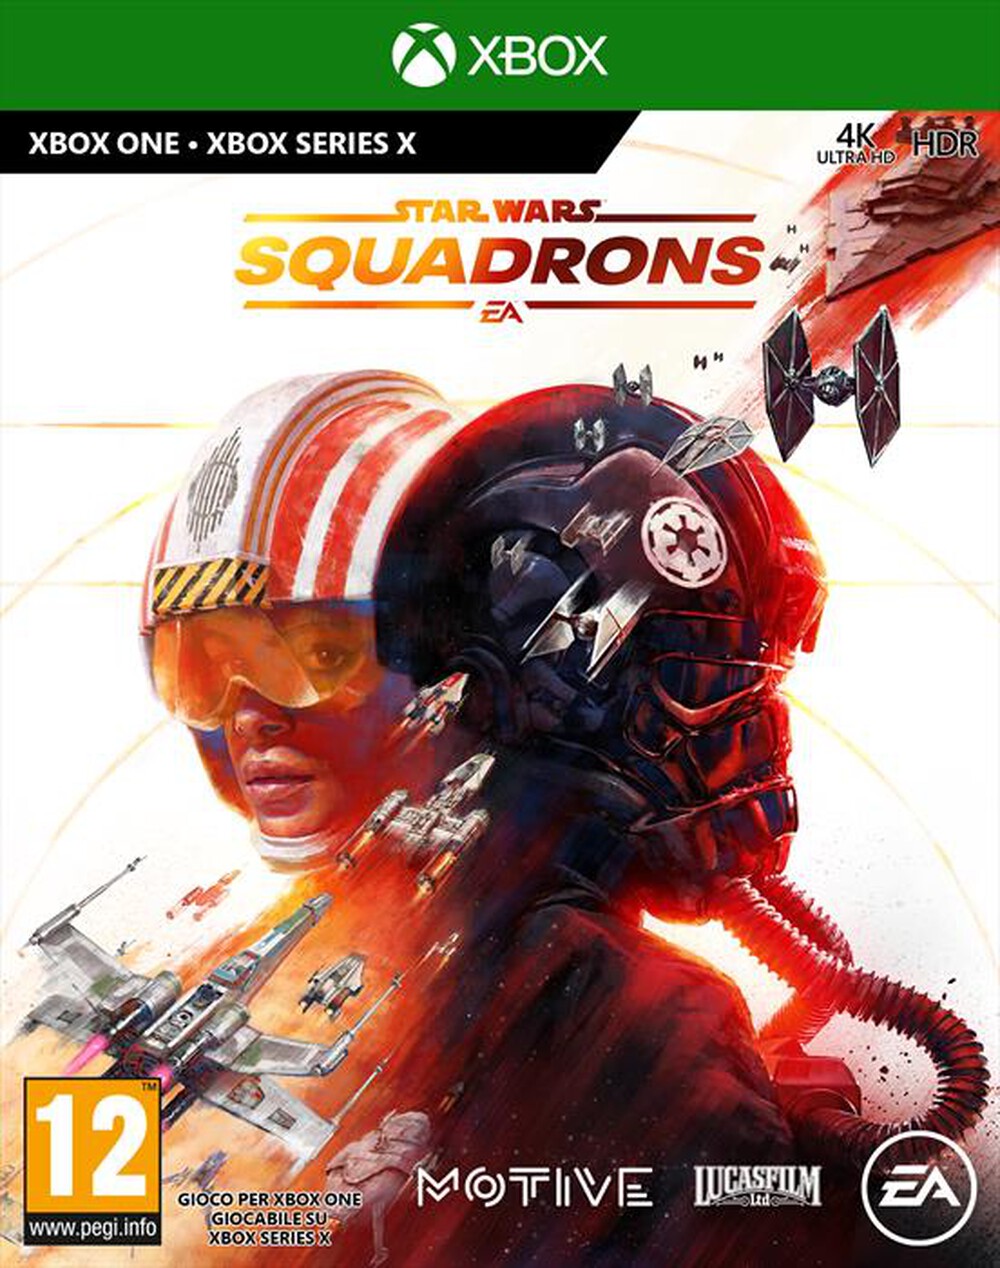 "ELECTRONIC ARTS - STAR WARS: SQUADRONS XBOX ONE"